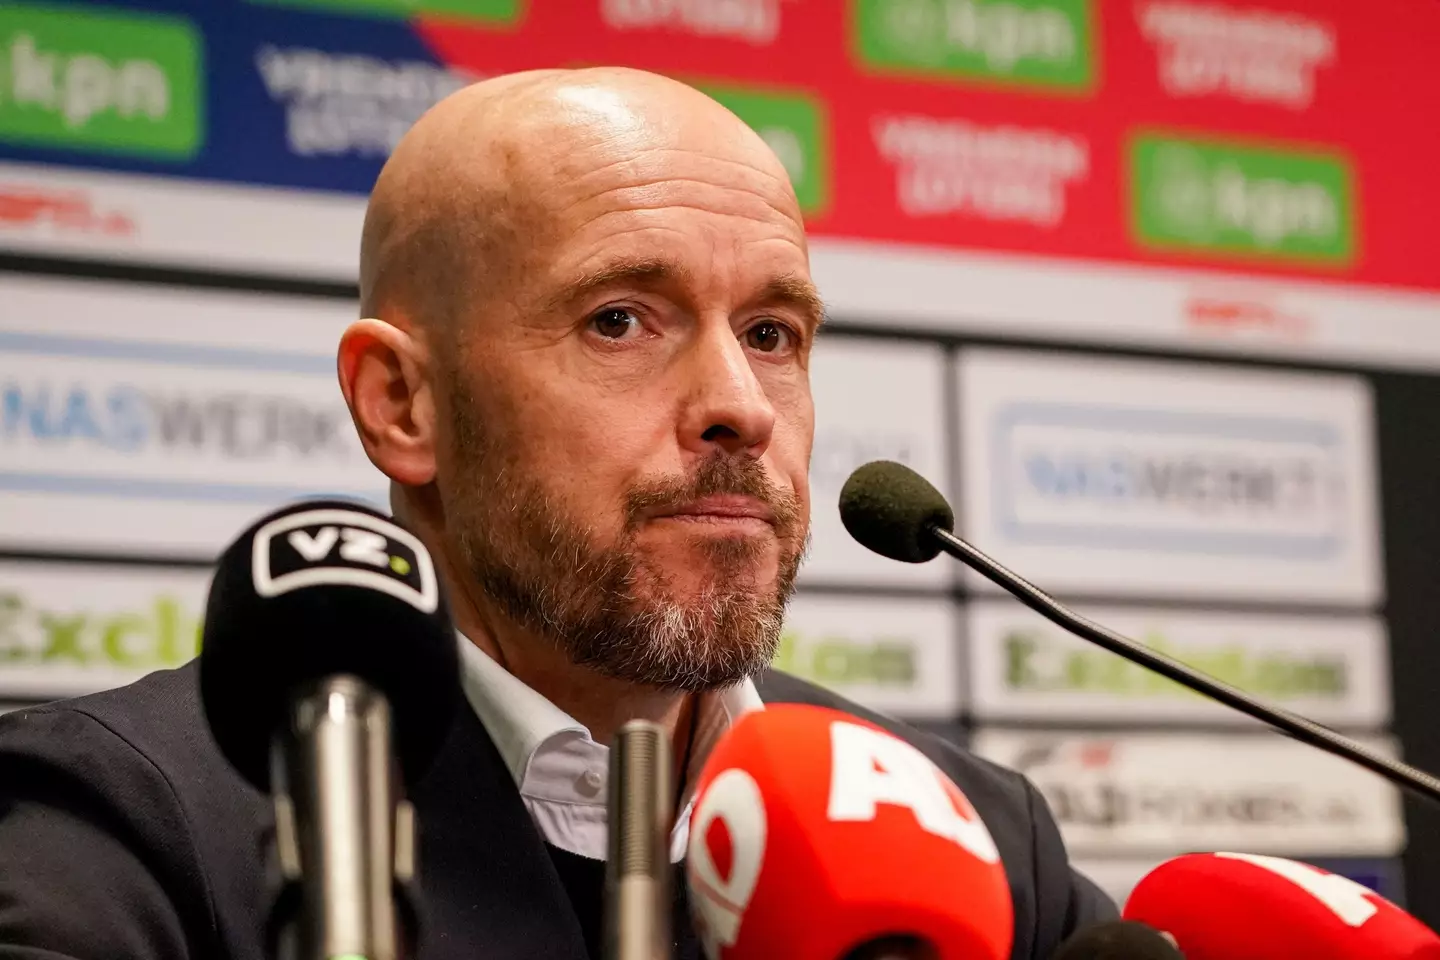 Ten Hag has a lot of work to do when he arrives in England in June. Image: PA Images